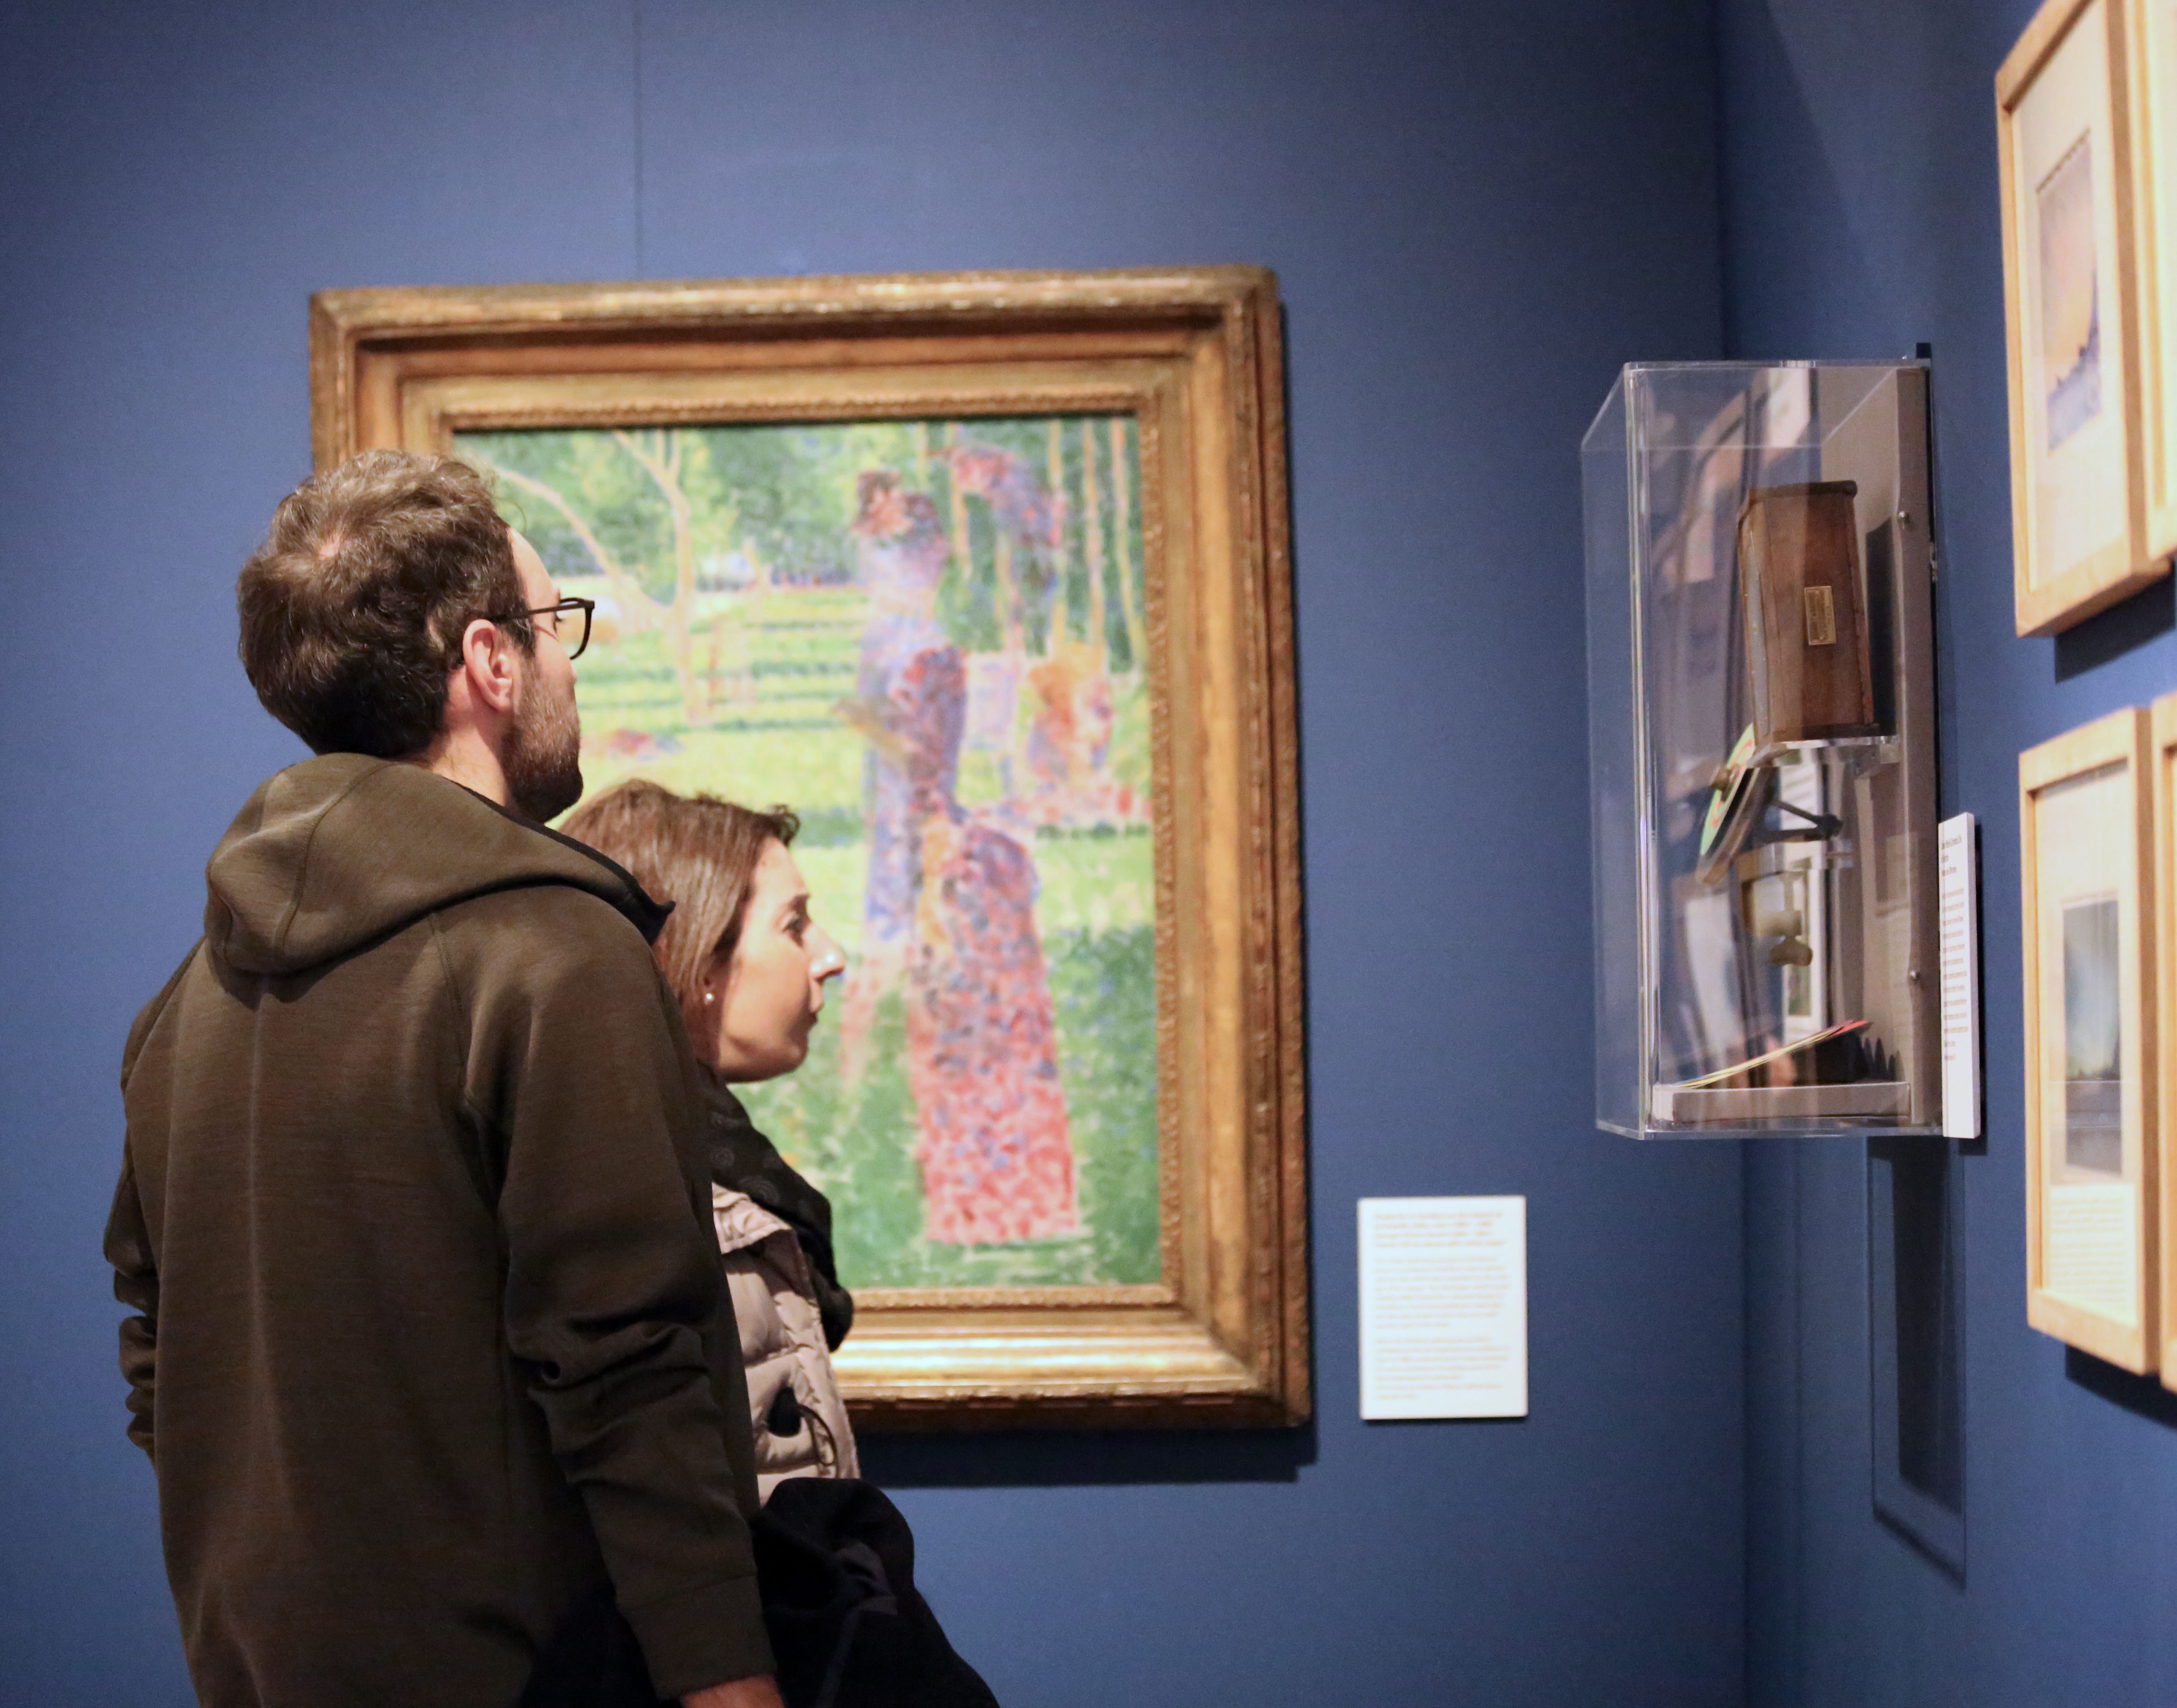 Two visitors to the museum stand in front of a painting. They are looking at objects displayed on the wall adjacent.